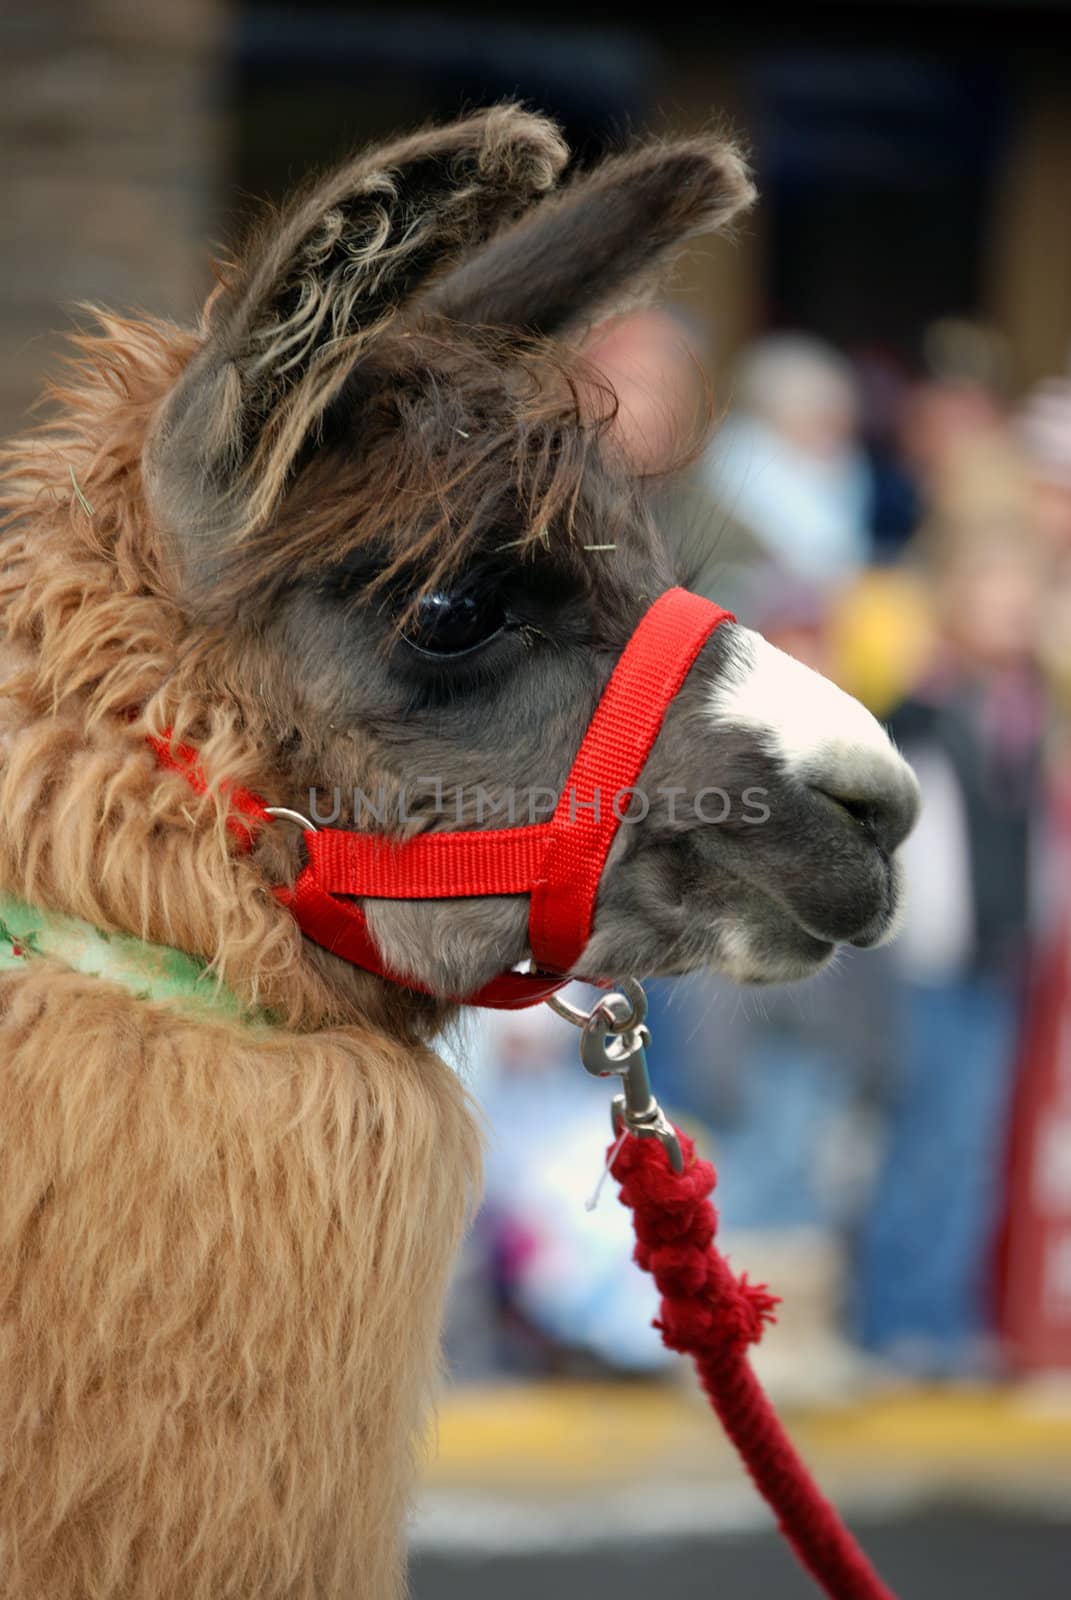 Llama with a red halter. by Eponaleah